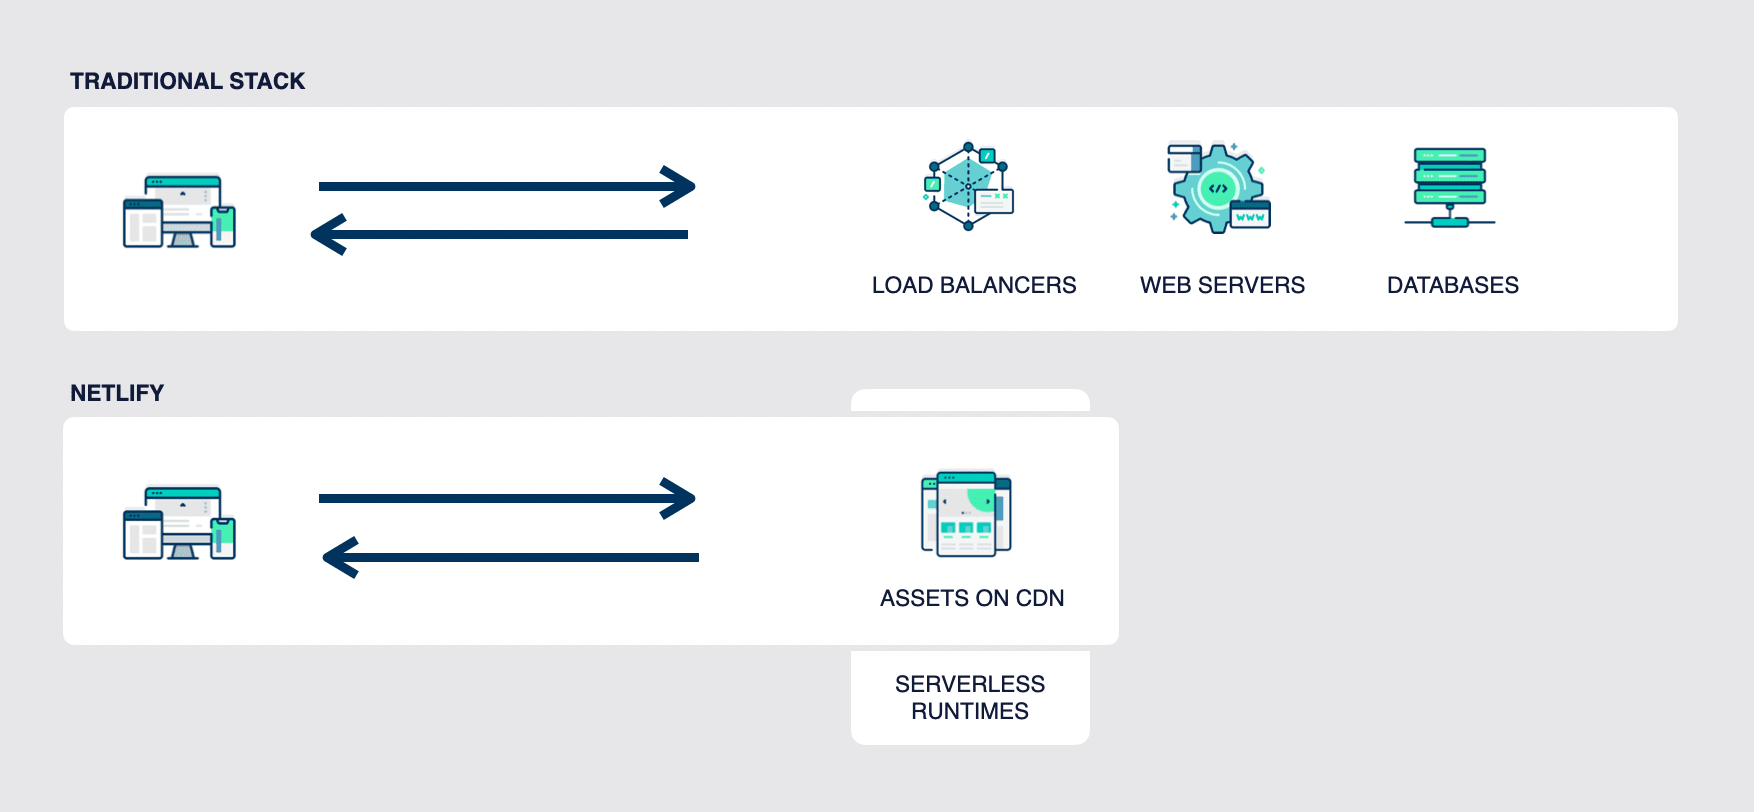 Comparison of a traditional stack using load balancers, web servers and databases to Netlify's stack using assets on CDNs and serverless runtimes.